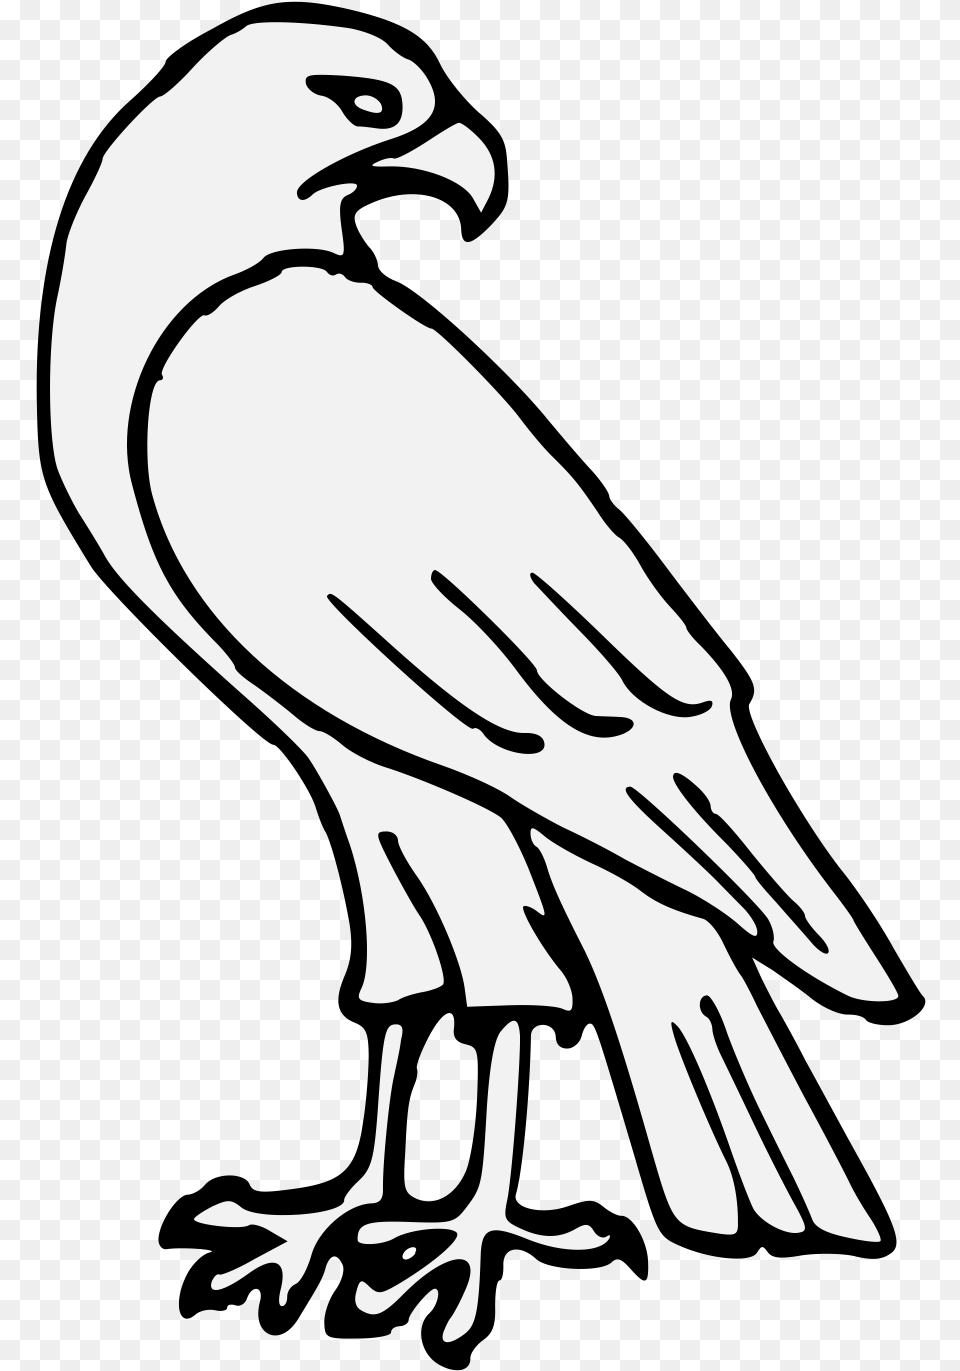 Download Falcon Clip Black And White Easy Easy Hawk Easy Drawing Of A Hawk, Stencil, Animal, Bird, Vulture Free Transparent Png